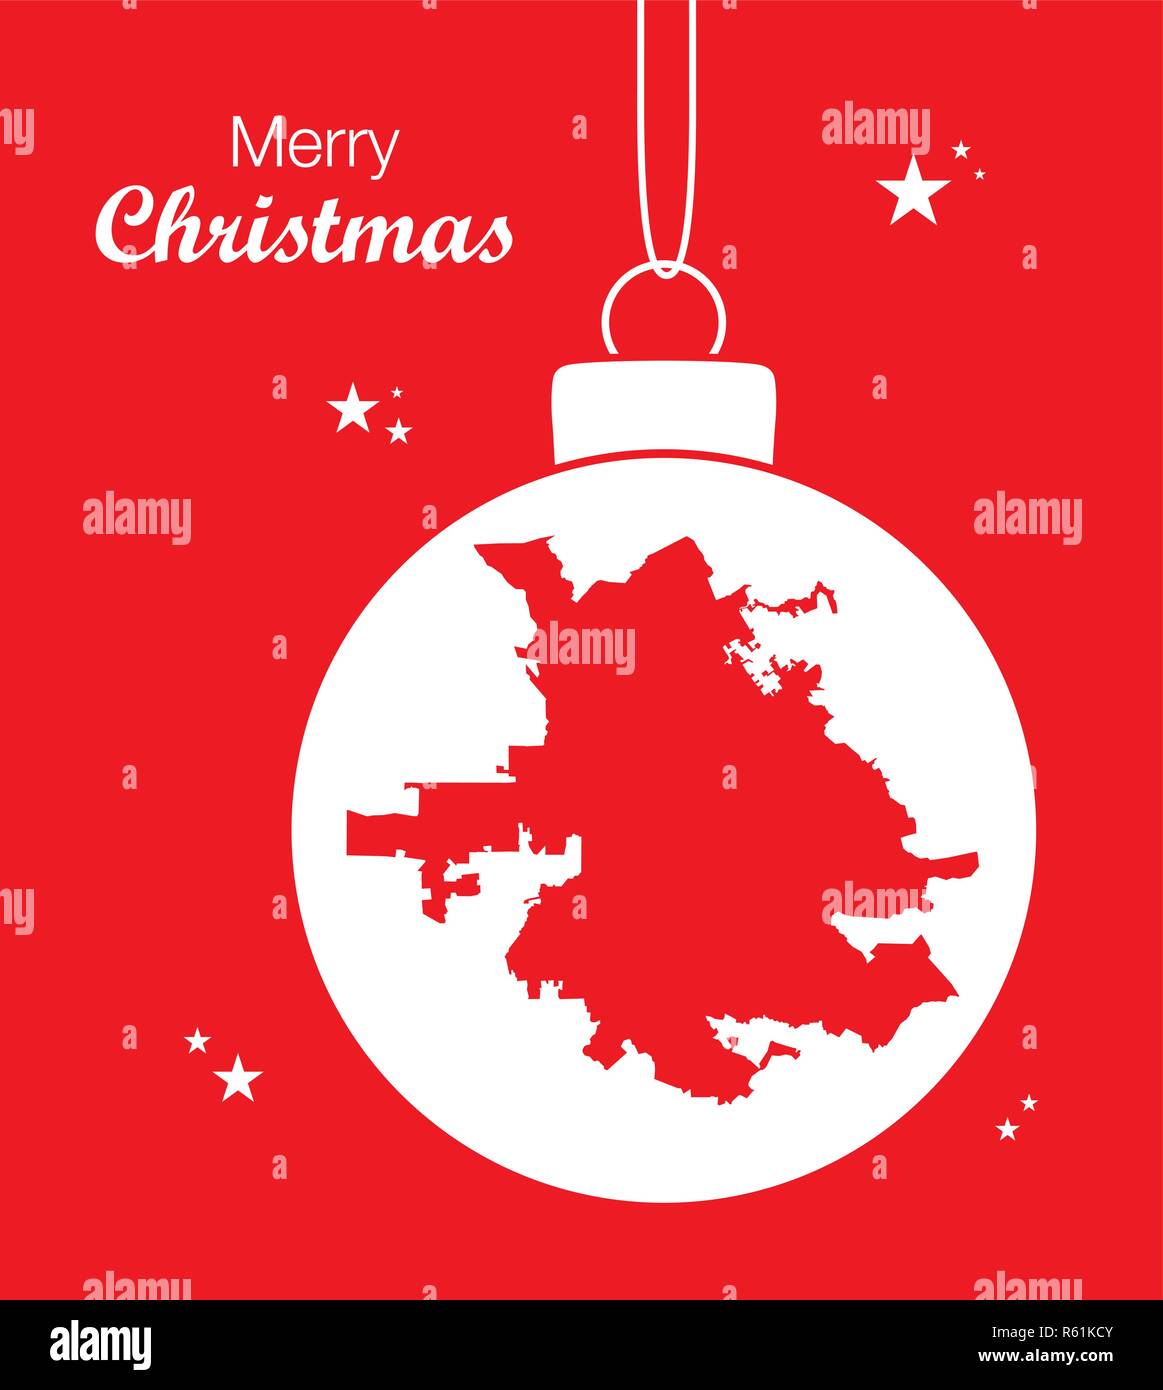 Merry Christmas illustration theme with map of San Jose Stock Vector